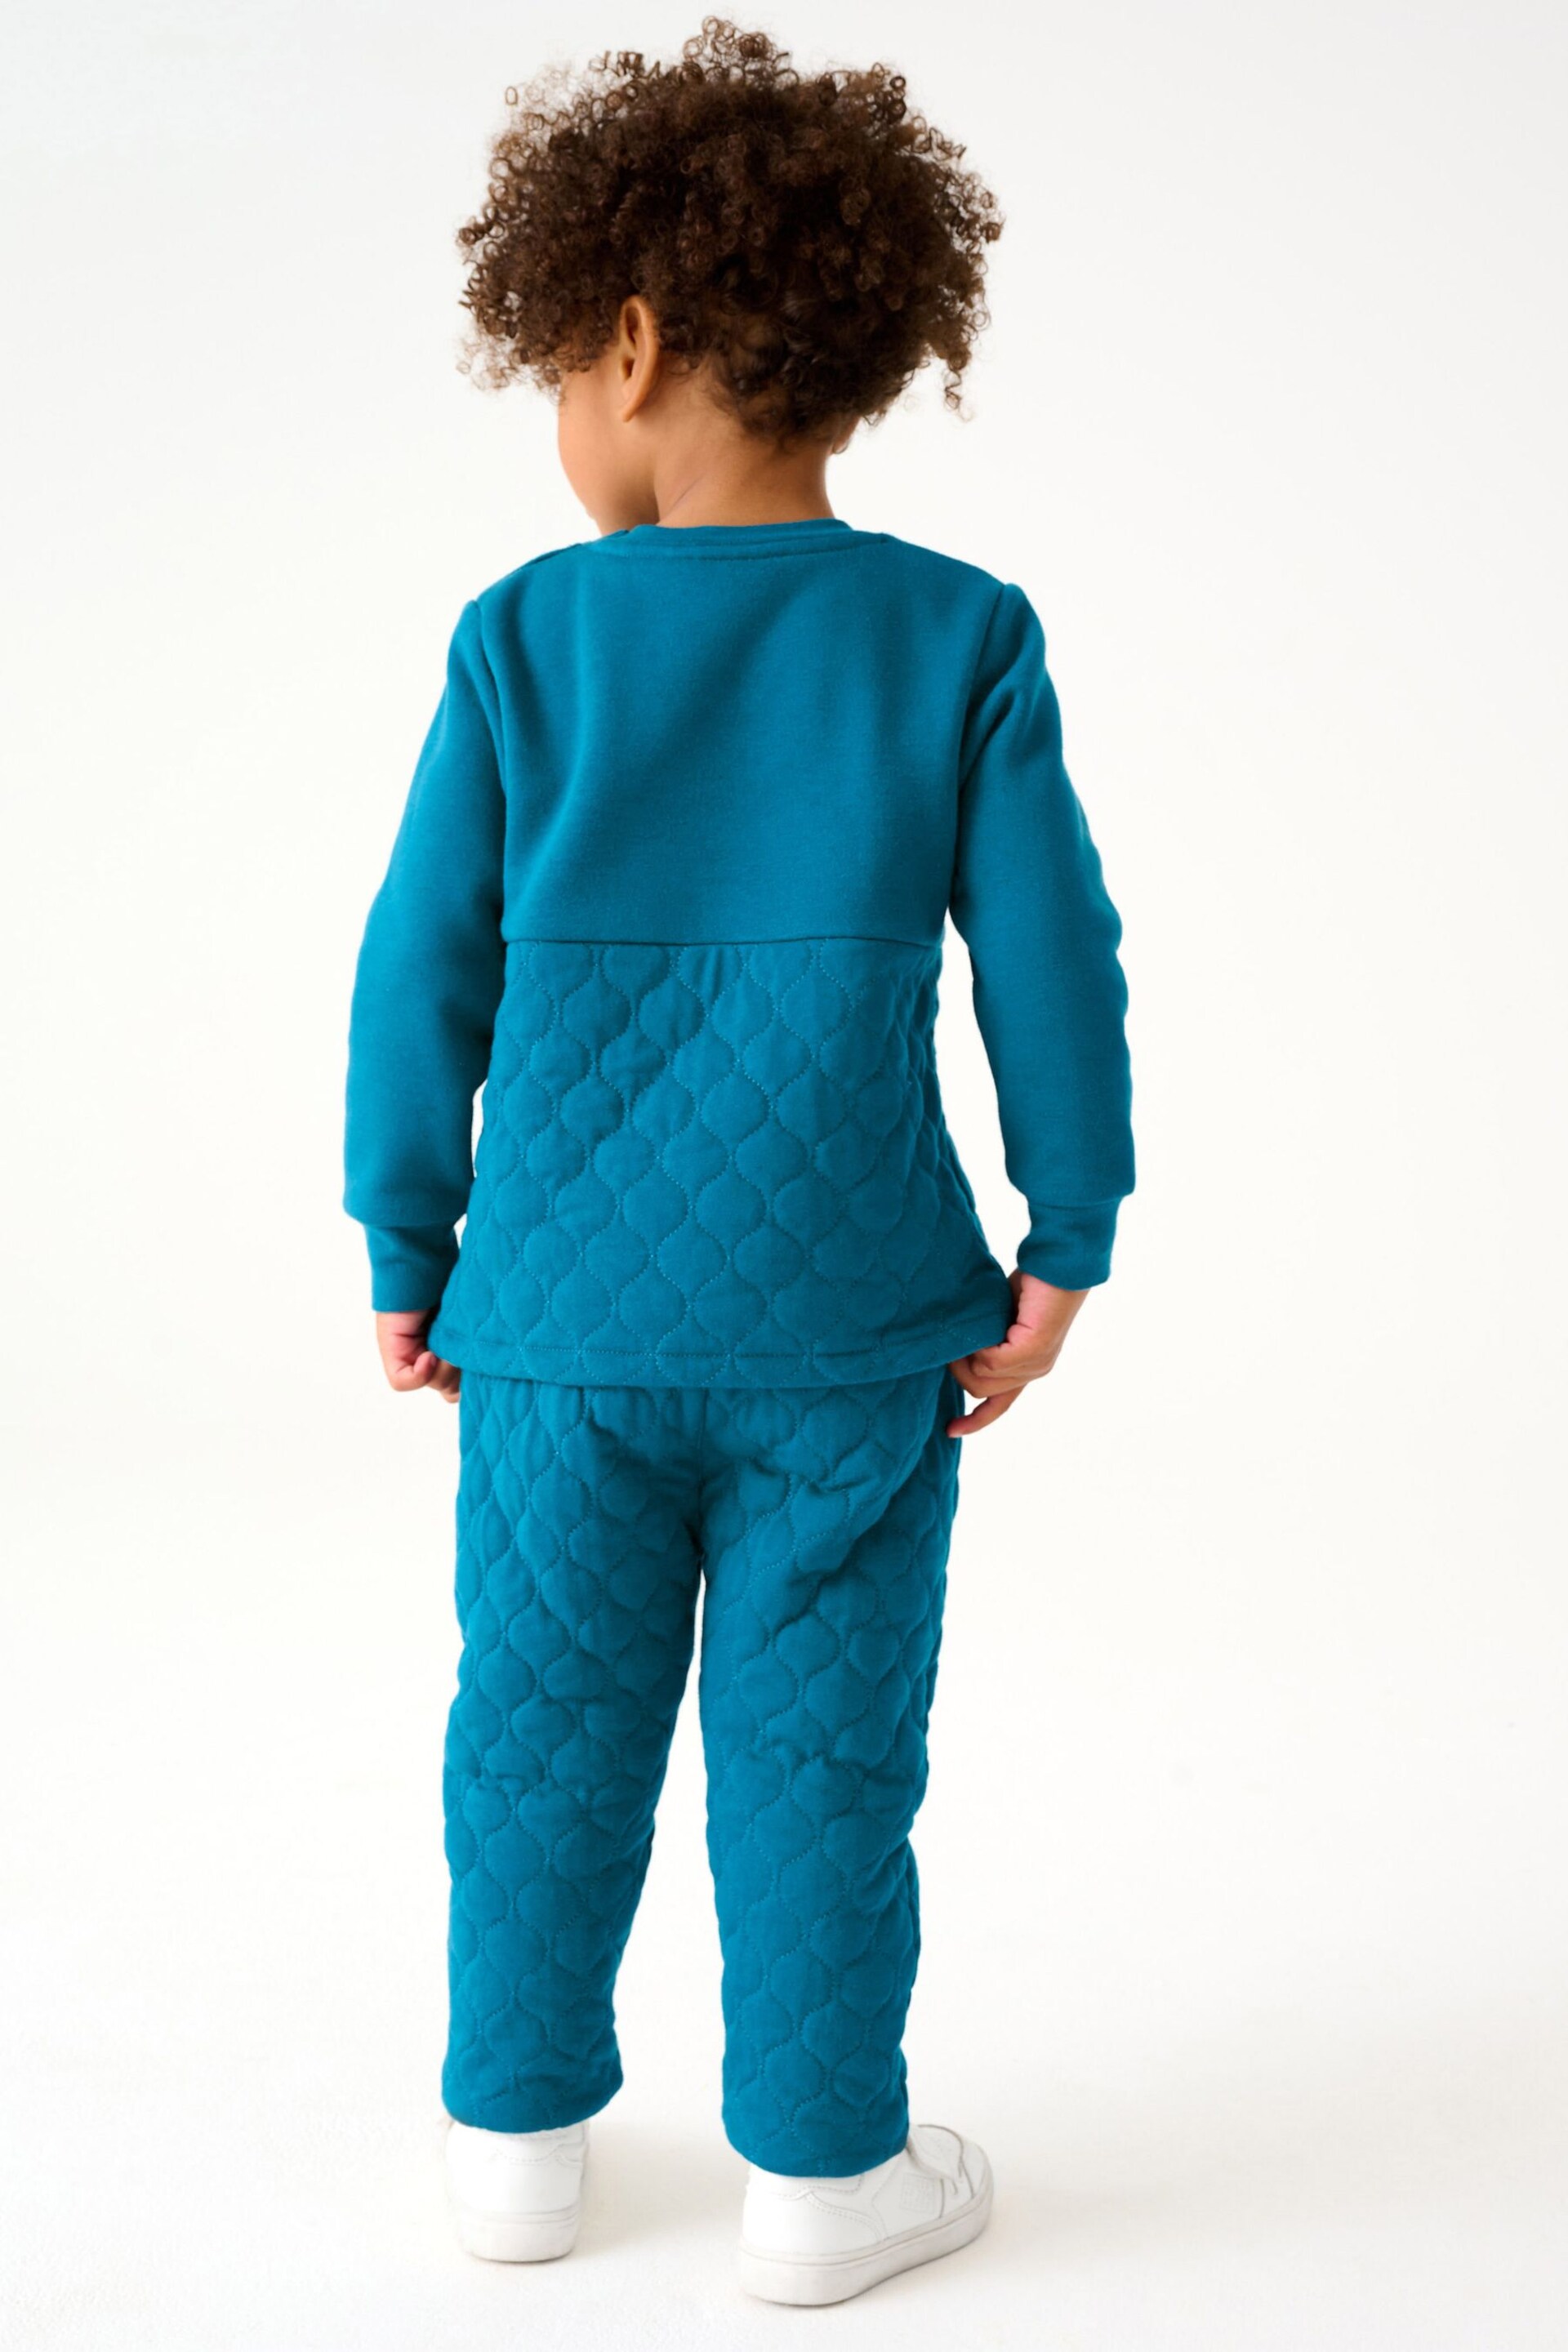 Baker by Ted Baker (0-6yrs) Quilted Sweater and Jogger Set - Image 3 of 13